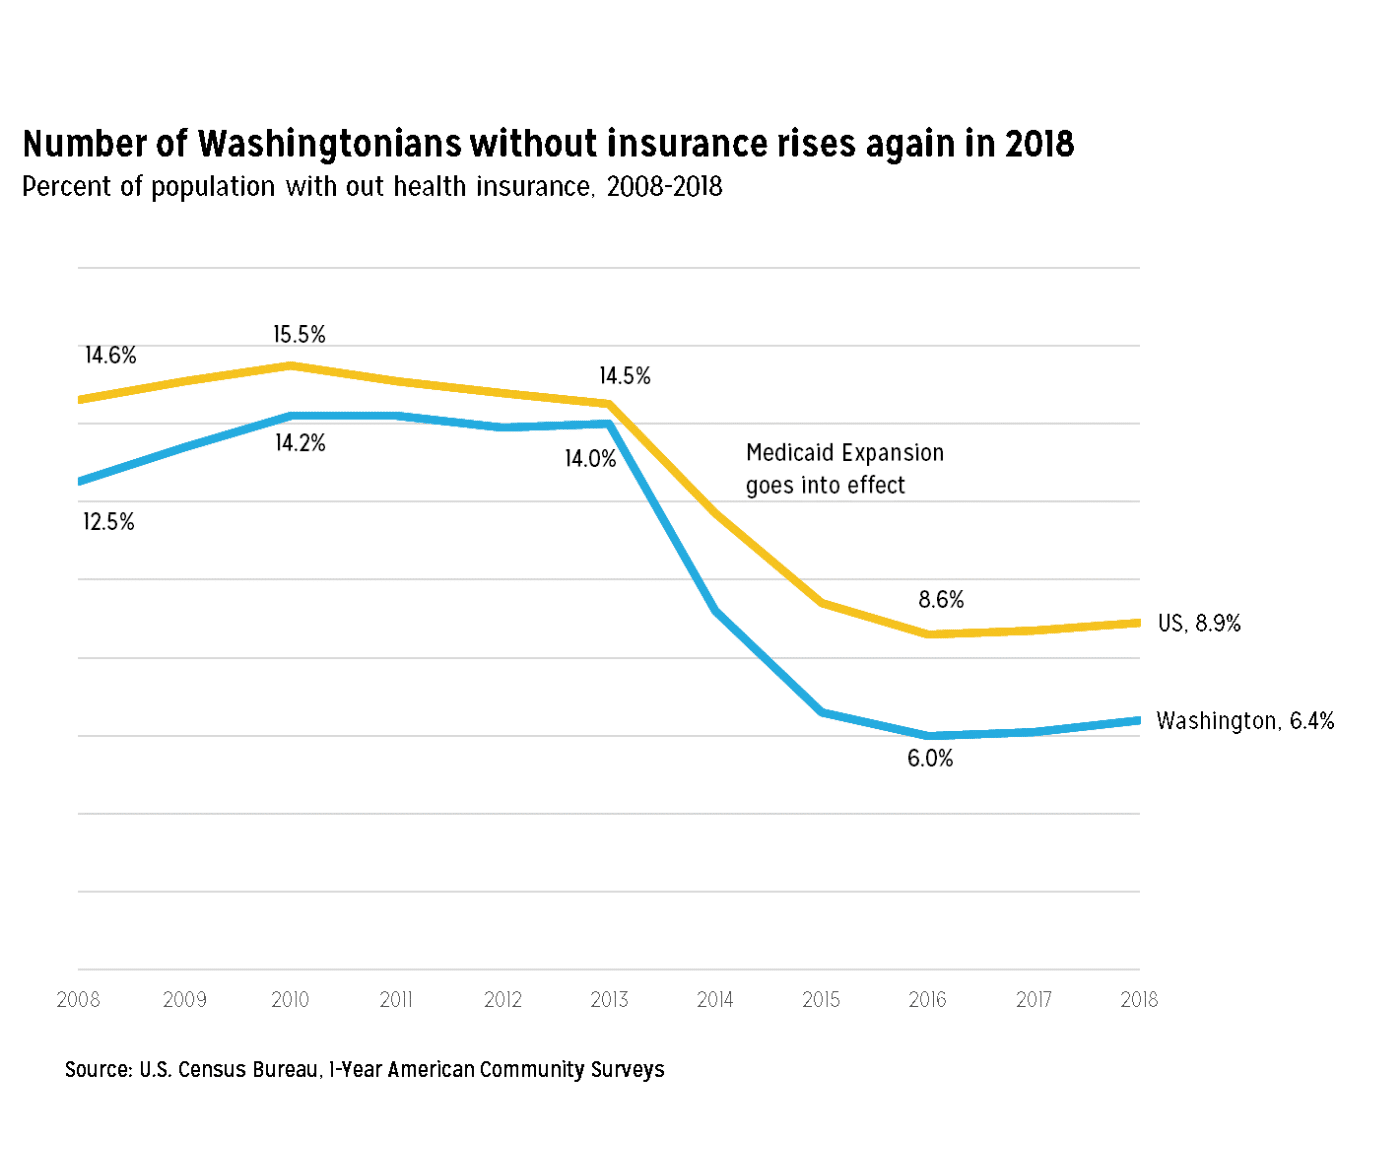 Line graph showing uninsured rates in WA rising from 6.0% in 2016 to 6.4% in 2018.